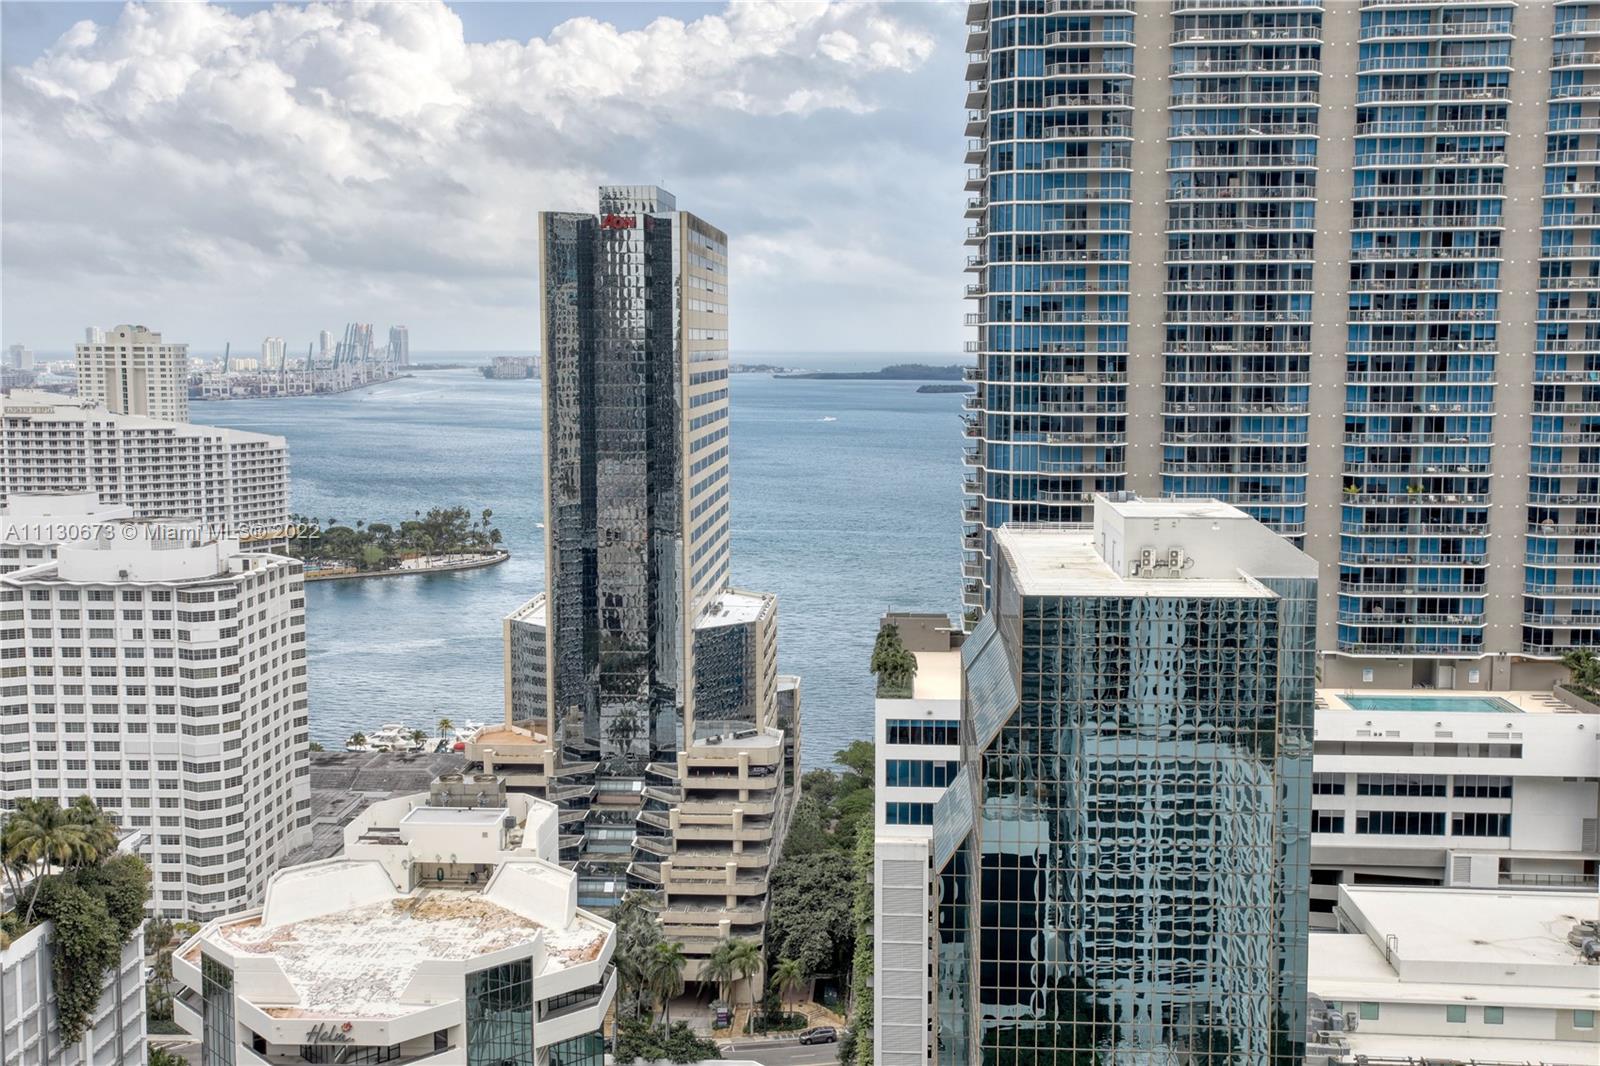 A few steps from Brickell City Centre and Mary Brickell Village features amazing amenities such as a business center, activities center for kids and adults, a spa, rooftop pools, massage rooms, a skyline running track, a restaurant, and an outdoor movie theater on the roof. Floor to ceiling windows, this is a great opportunity to own a unit at one of Miami's newest luxury high rise in the heart of the Brickell Area. Close to Bayfront Park, Brickell Park, and Simpson Park.